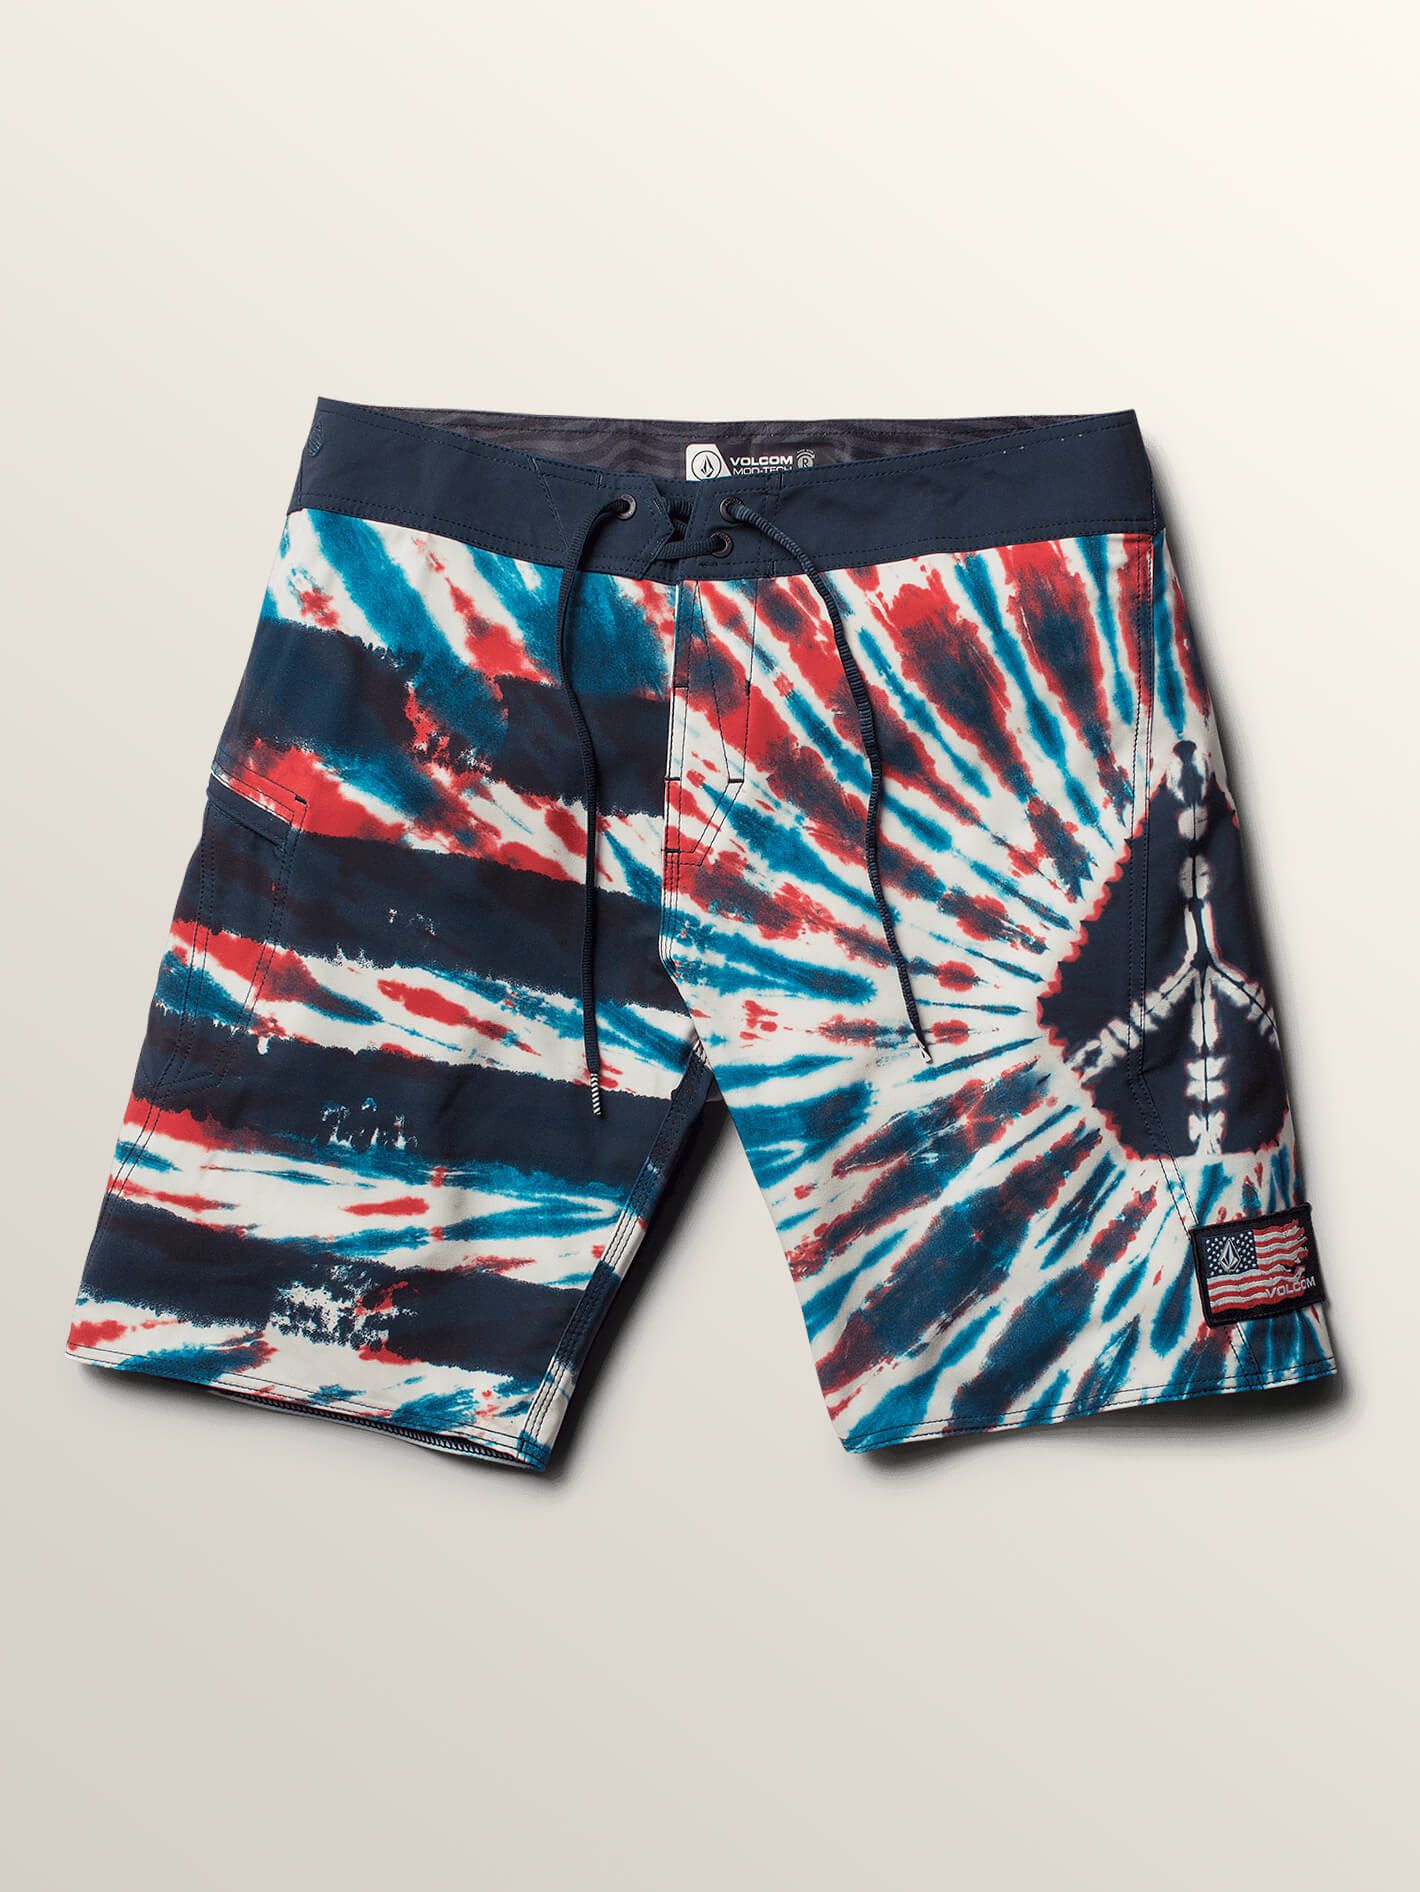 Save with new discounts on Men's Boardshorts